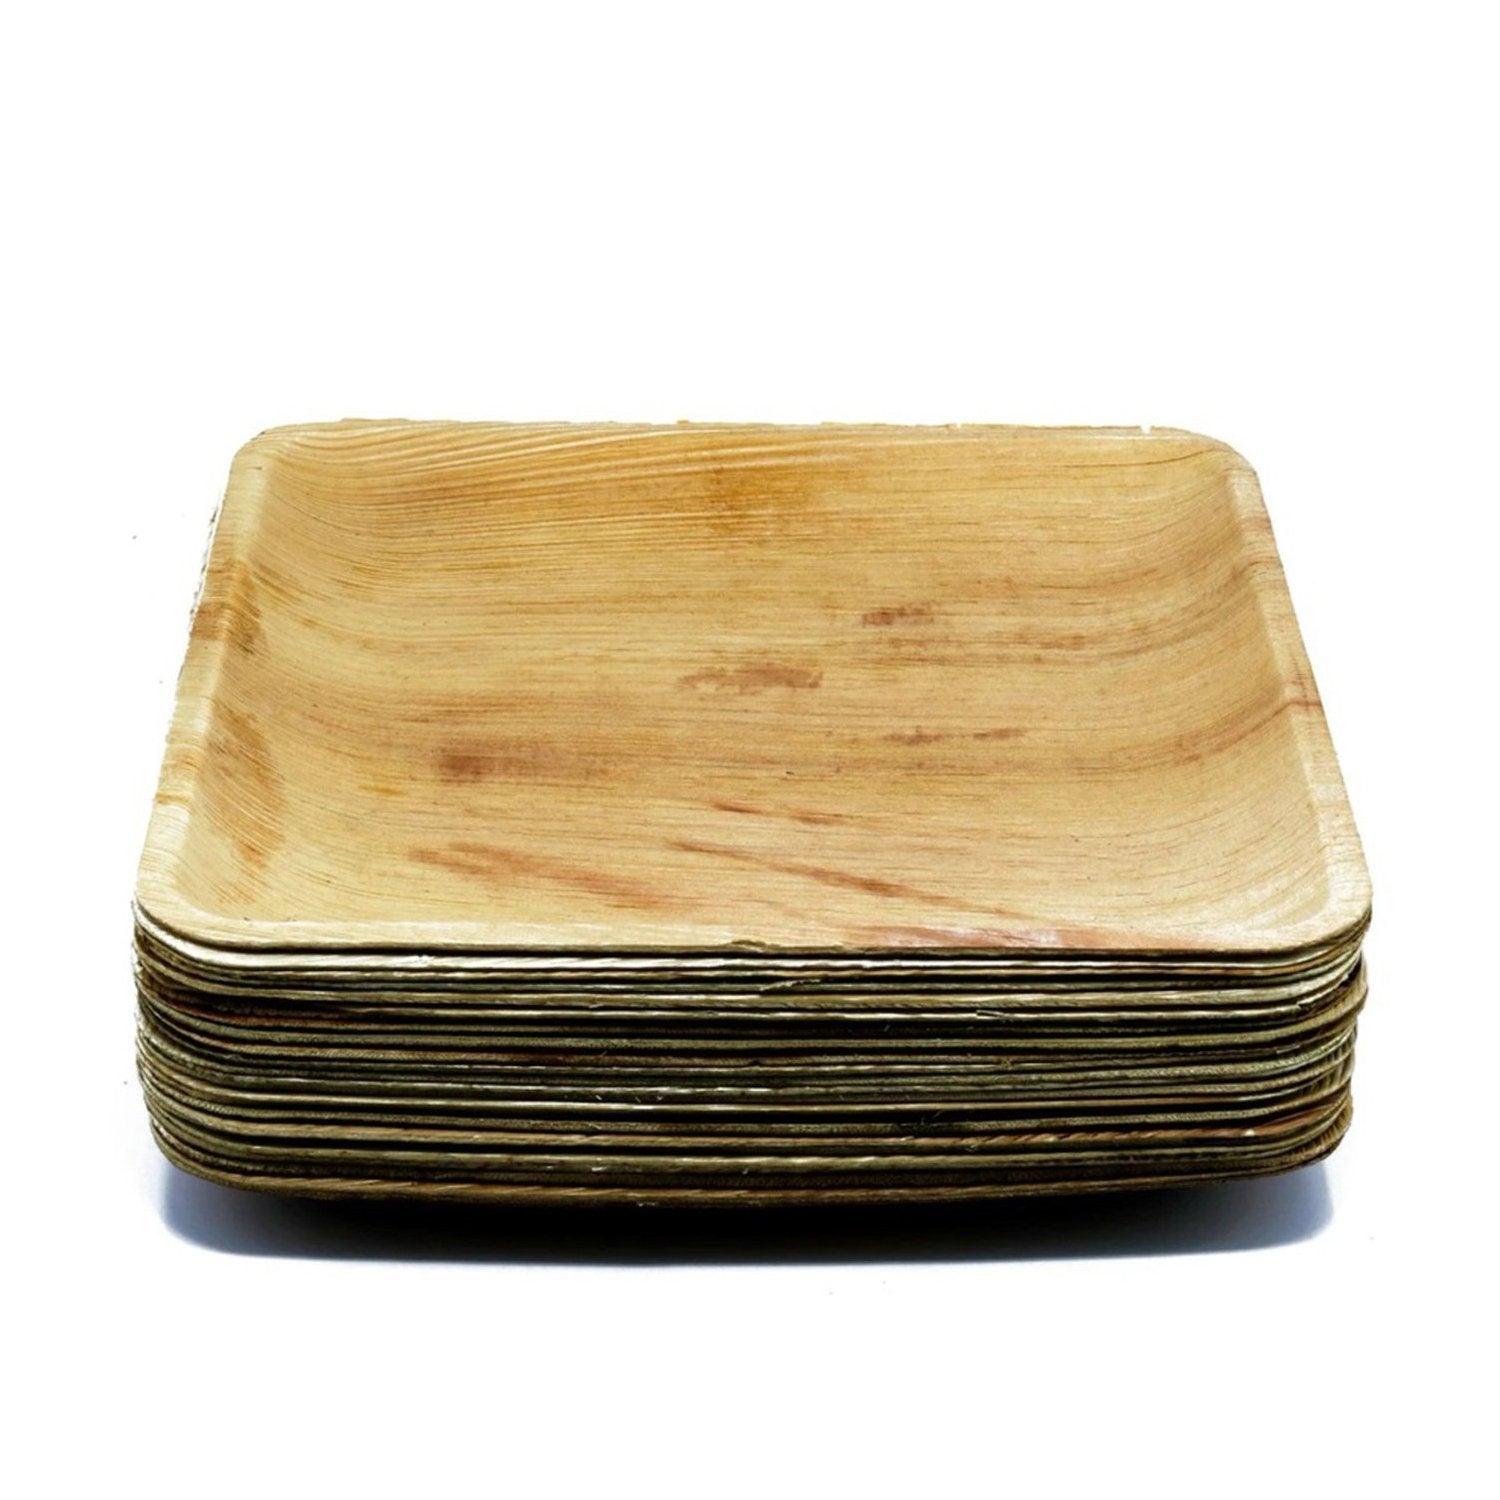 3214 Disposable Square Eco-friendly Areca Palm Leaf Plate (10x10 inch) (pack of 25) - SkyShopy